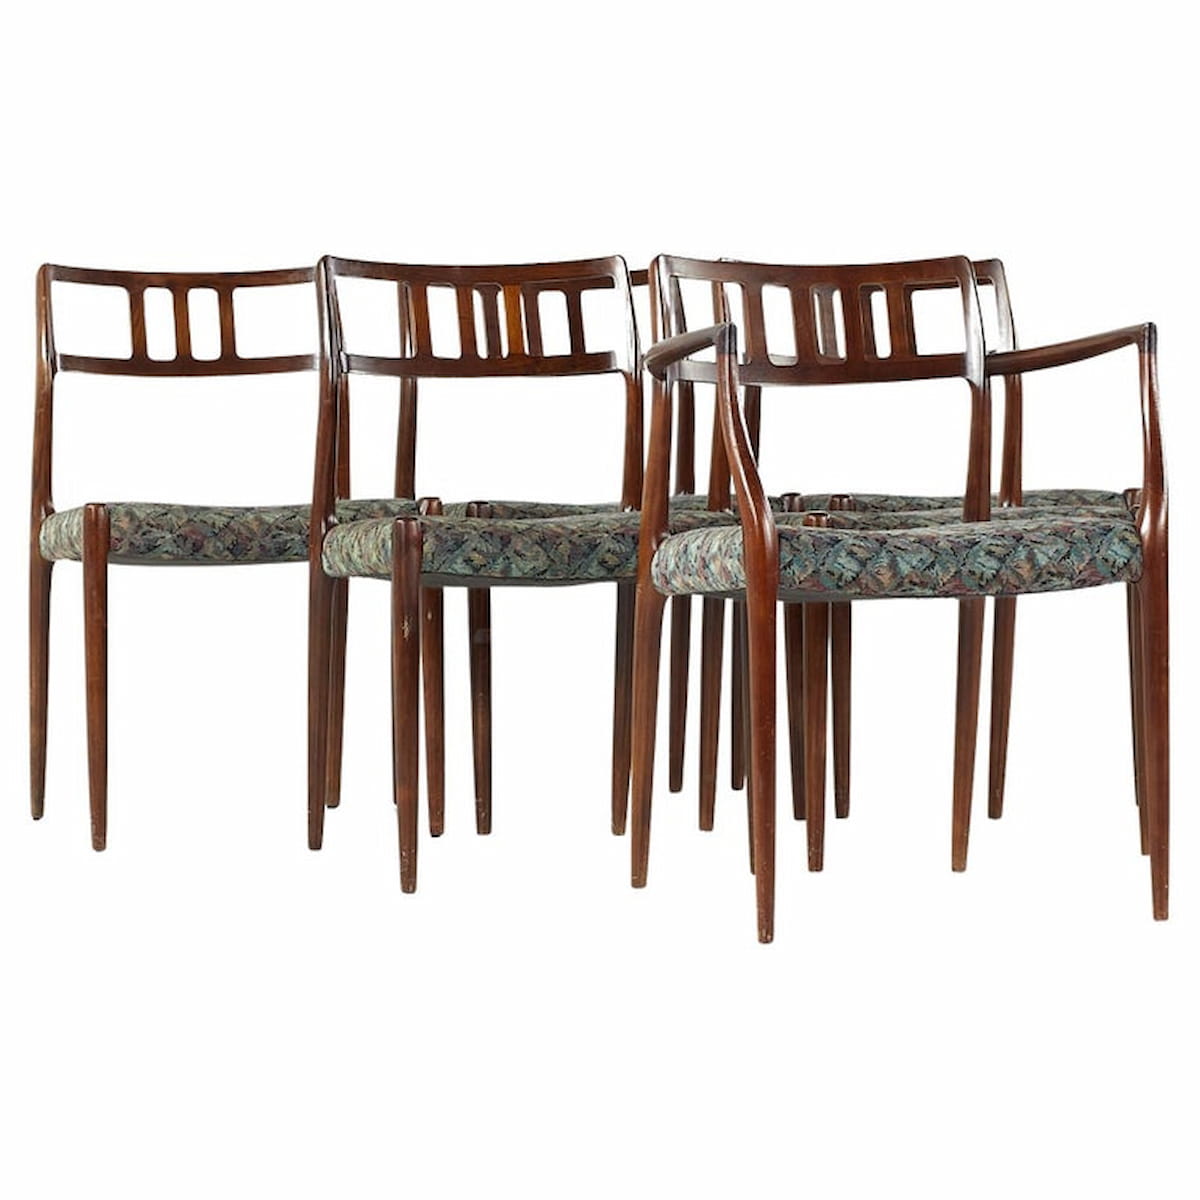 Niels Moller Mid Century Model 79 Rosewood Dining Chairs - Set of 6